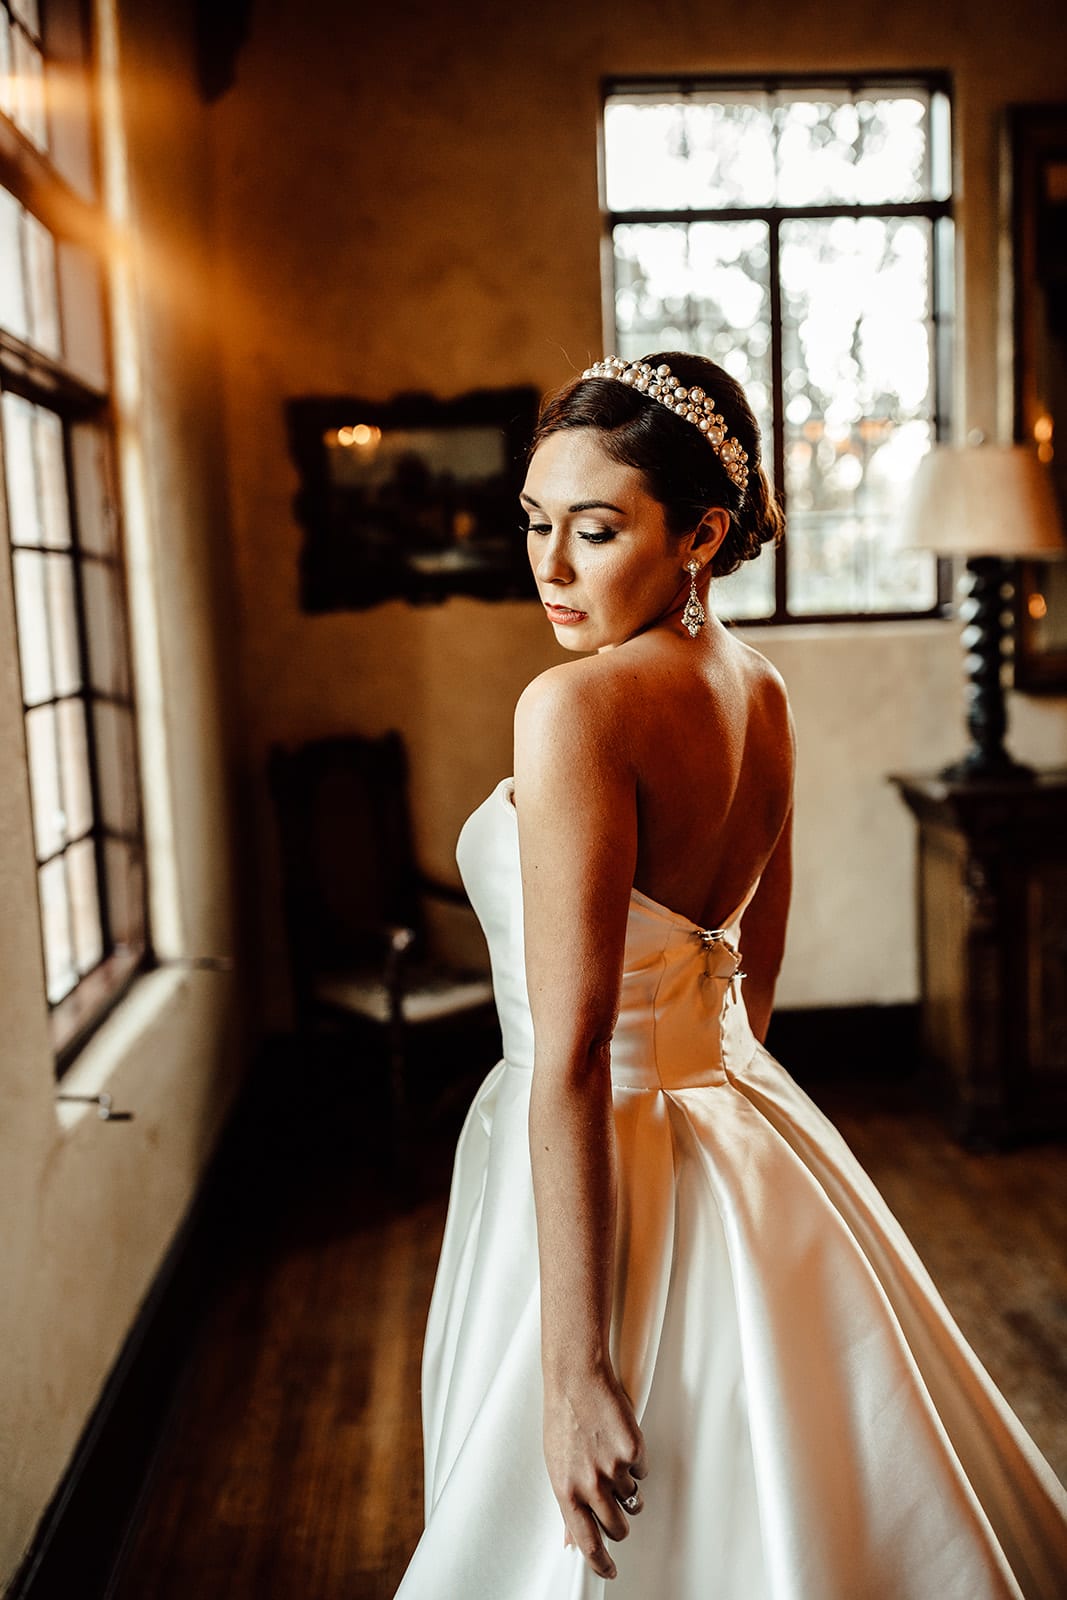 Emerald Wedding Styled Shoot @ The Howey Mansion